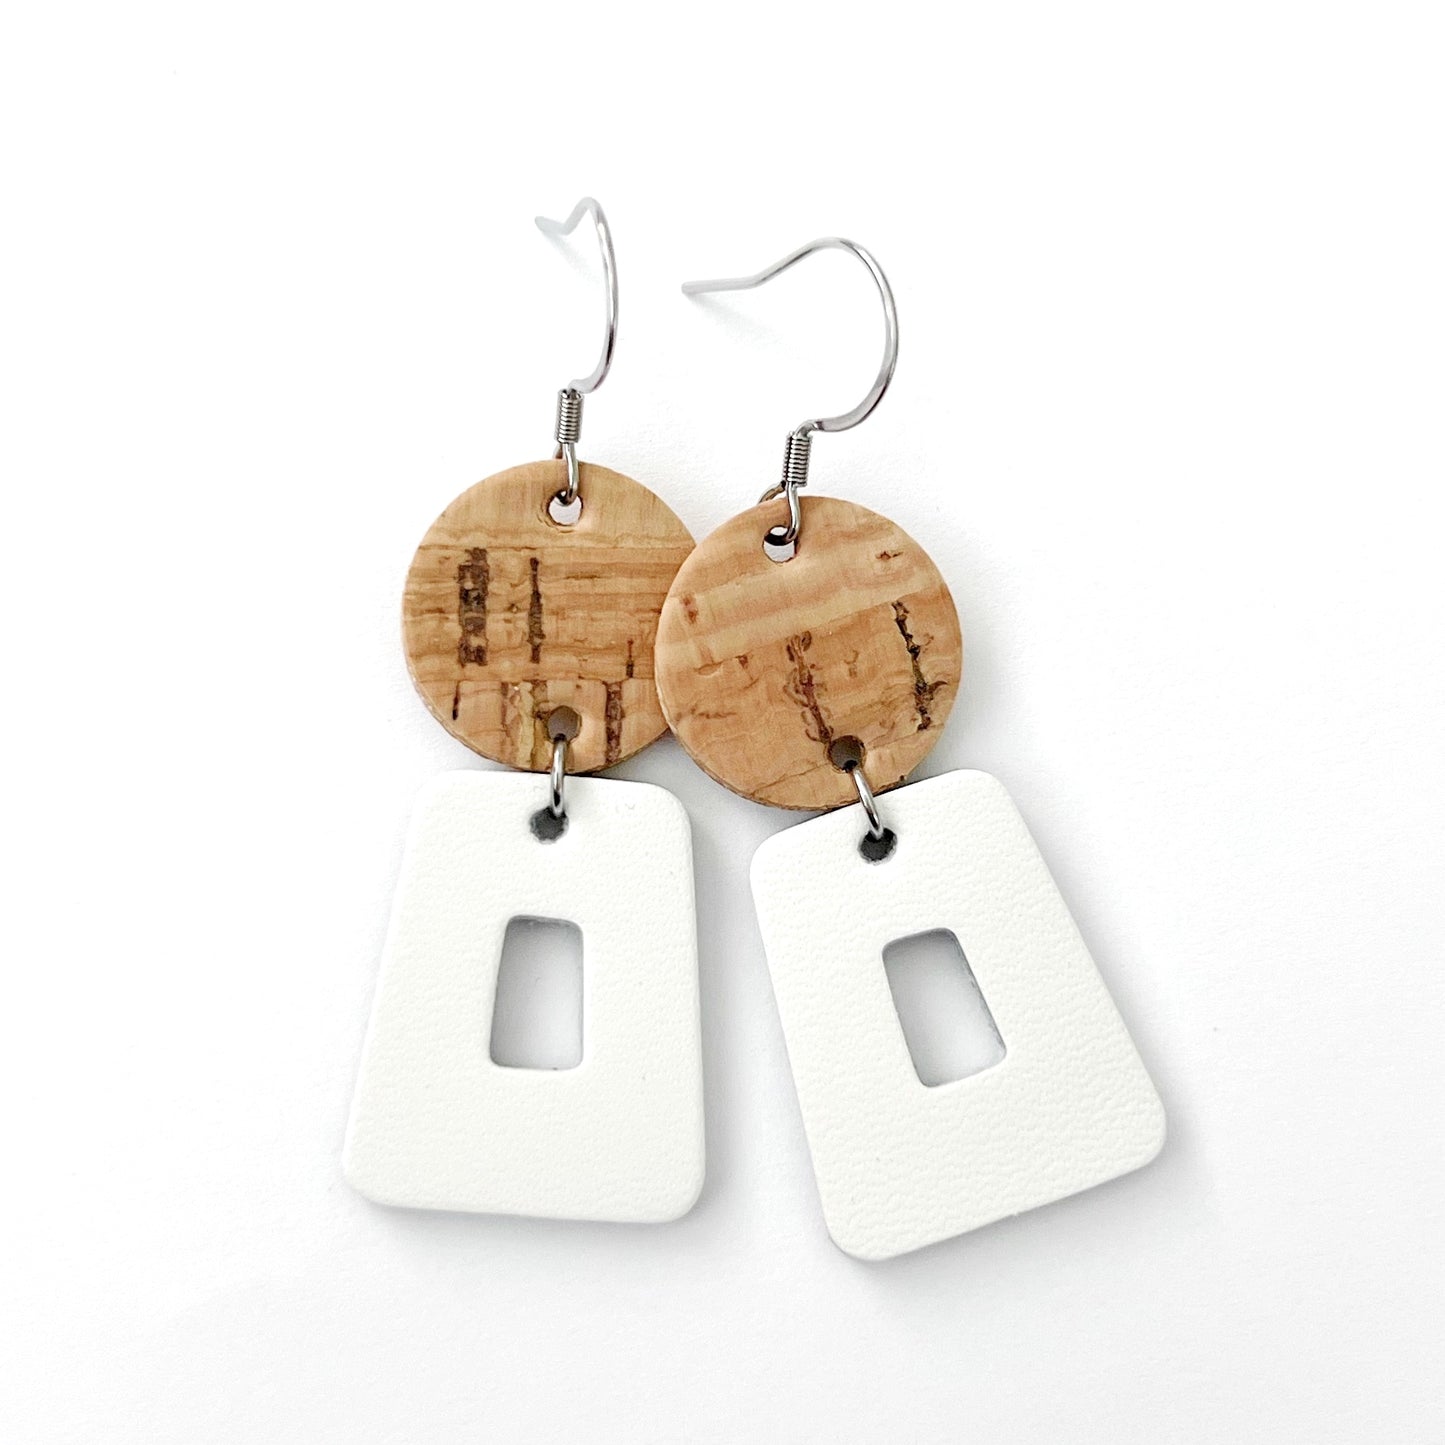 Retro Inspired Shapes with Natural Cork & White Leather lightweight statement earrings